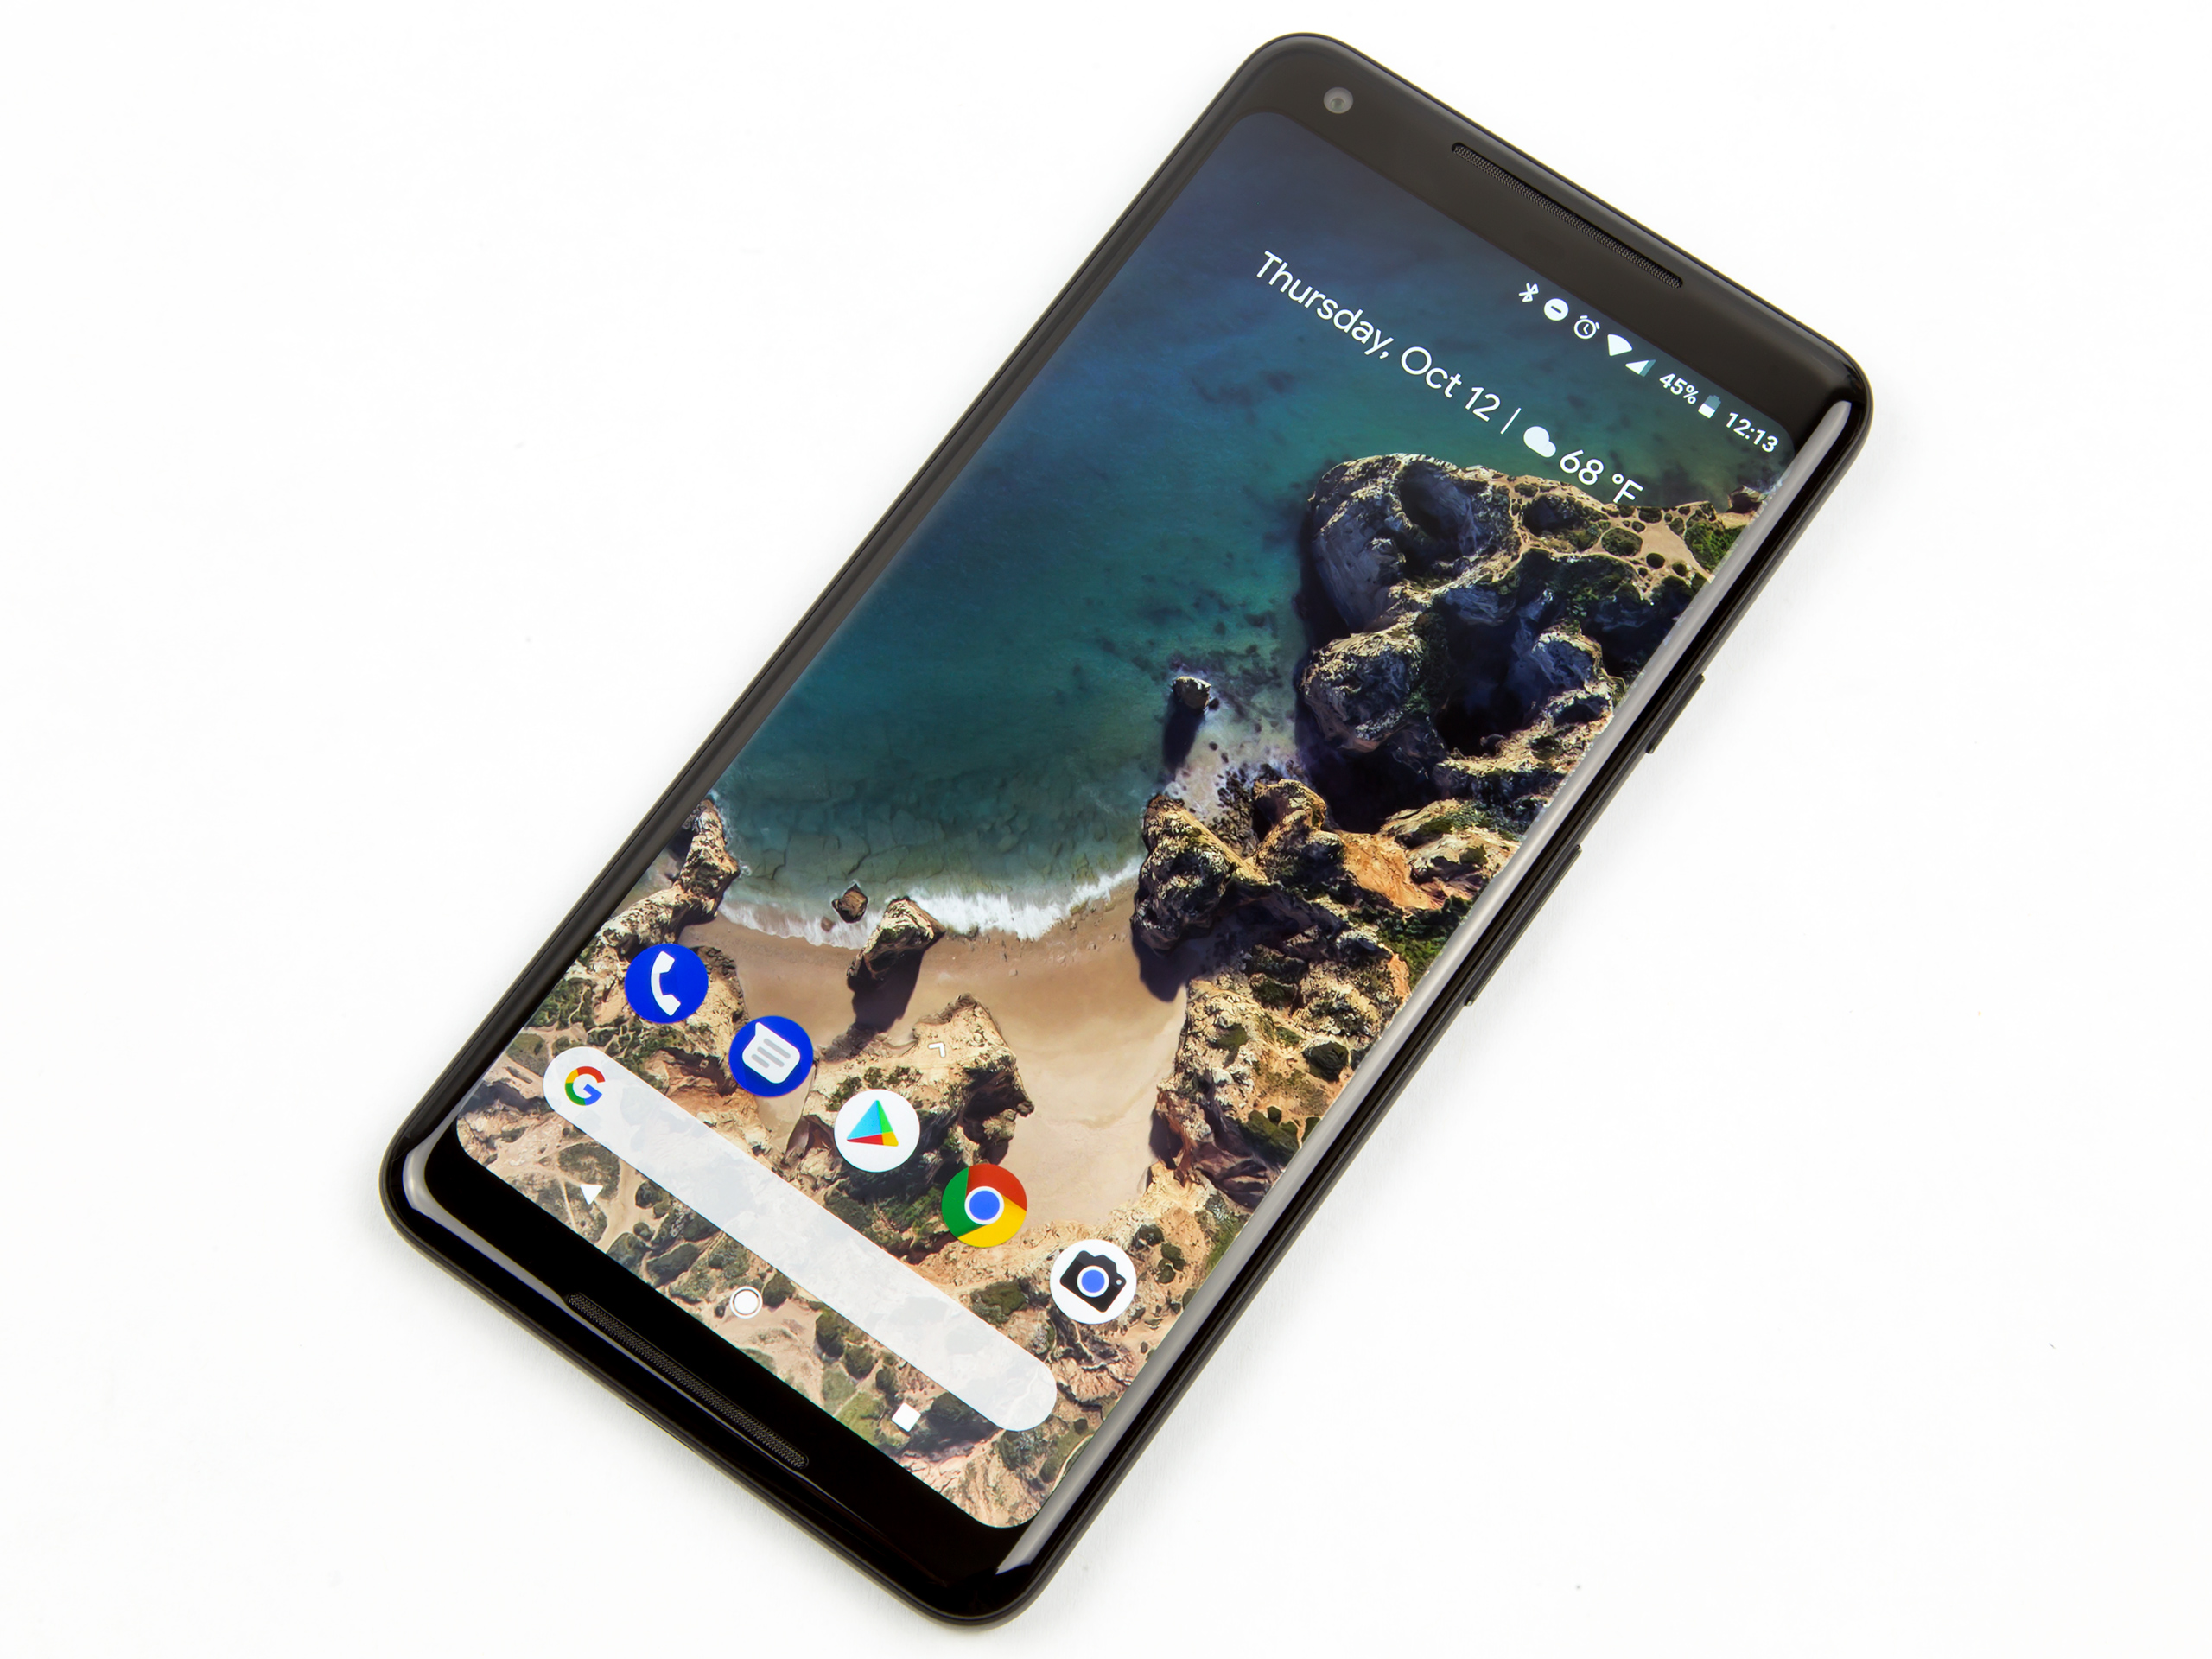 Google Pixel 2 XL review: the best big-screened Android experience